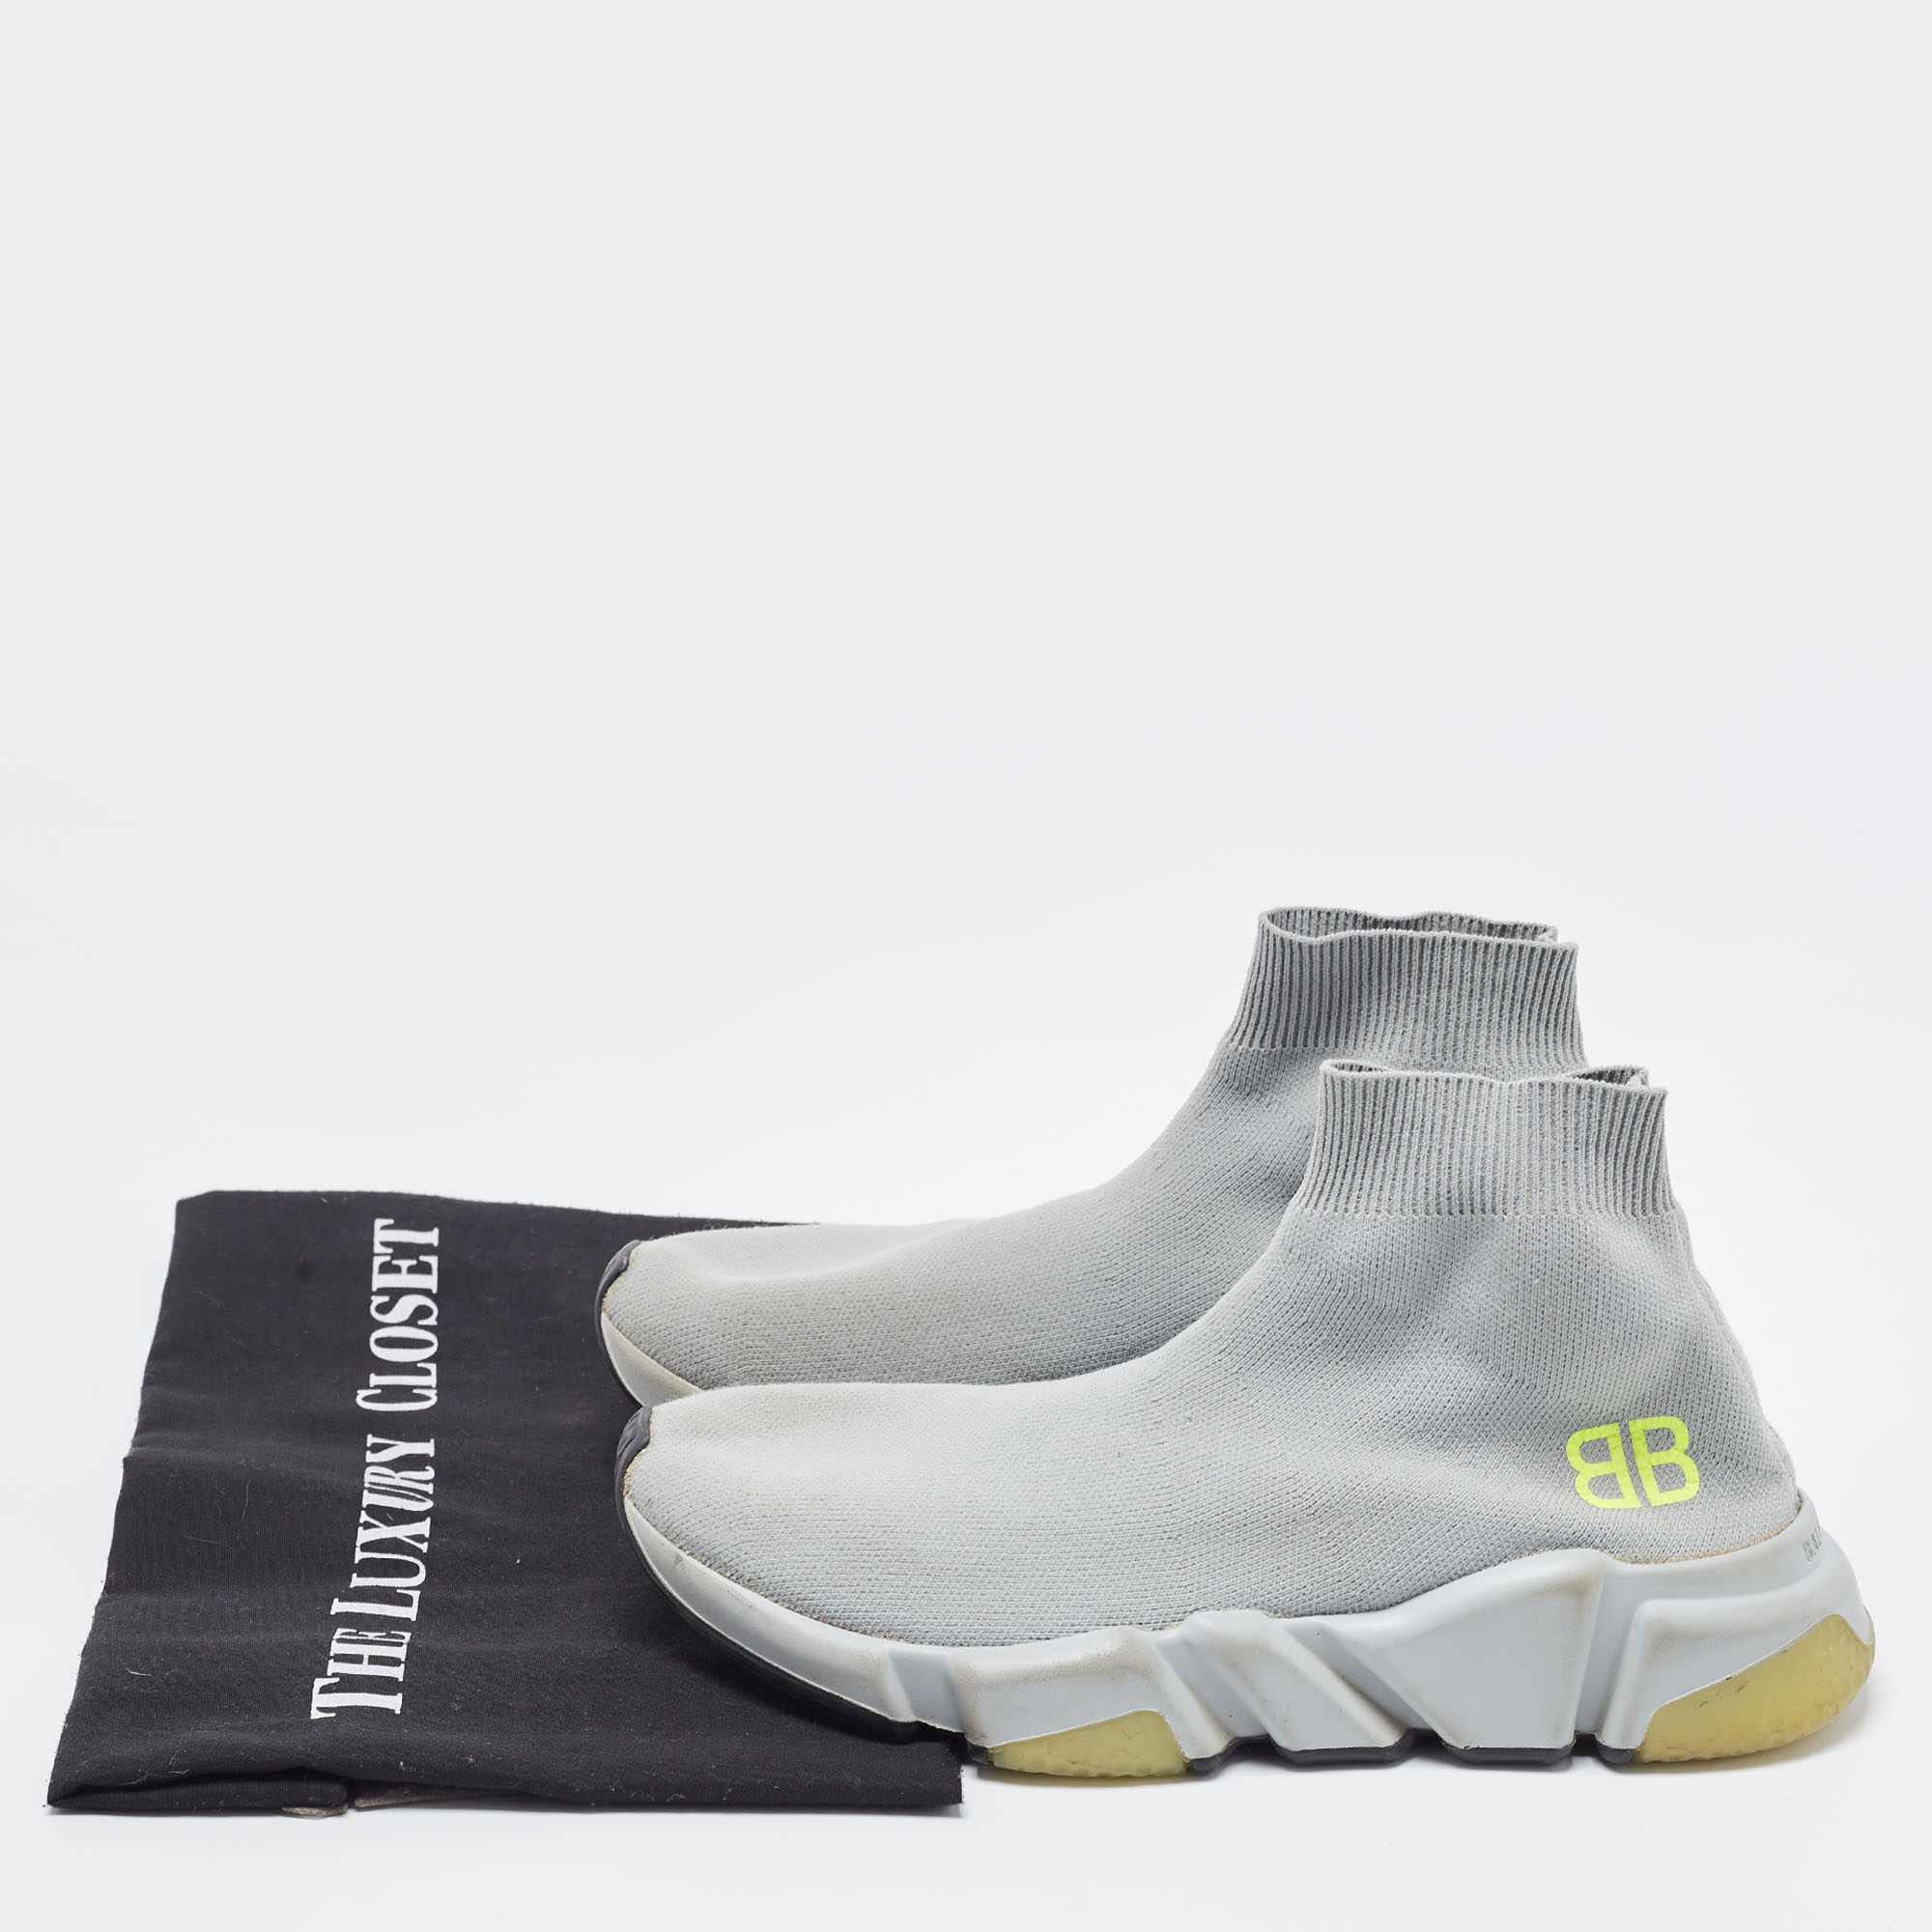 Balenciaga Grey Knit Fabric Speed Trainer Sneakers Size 37